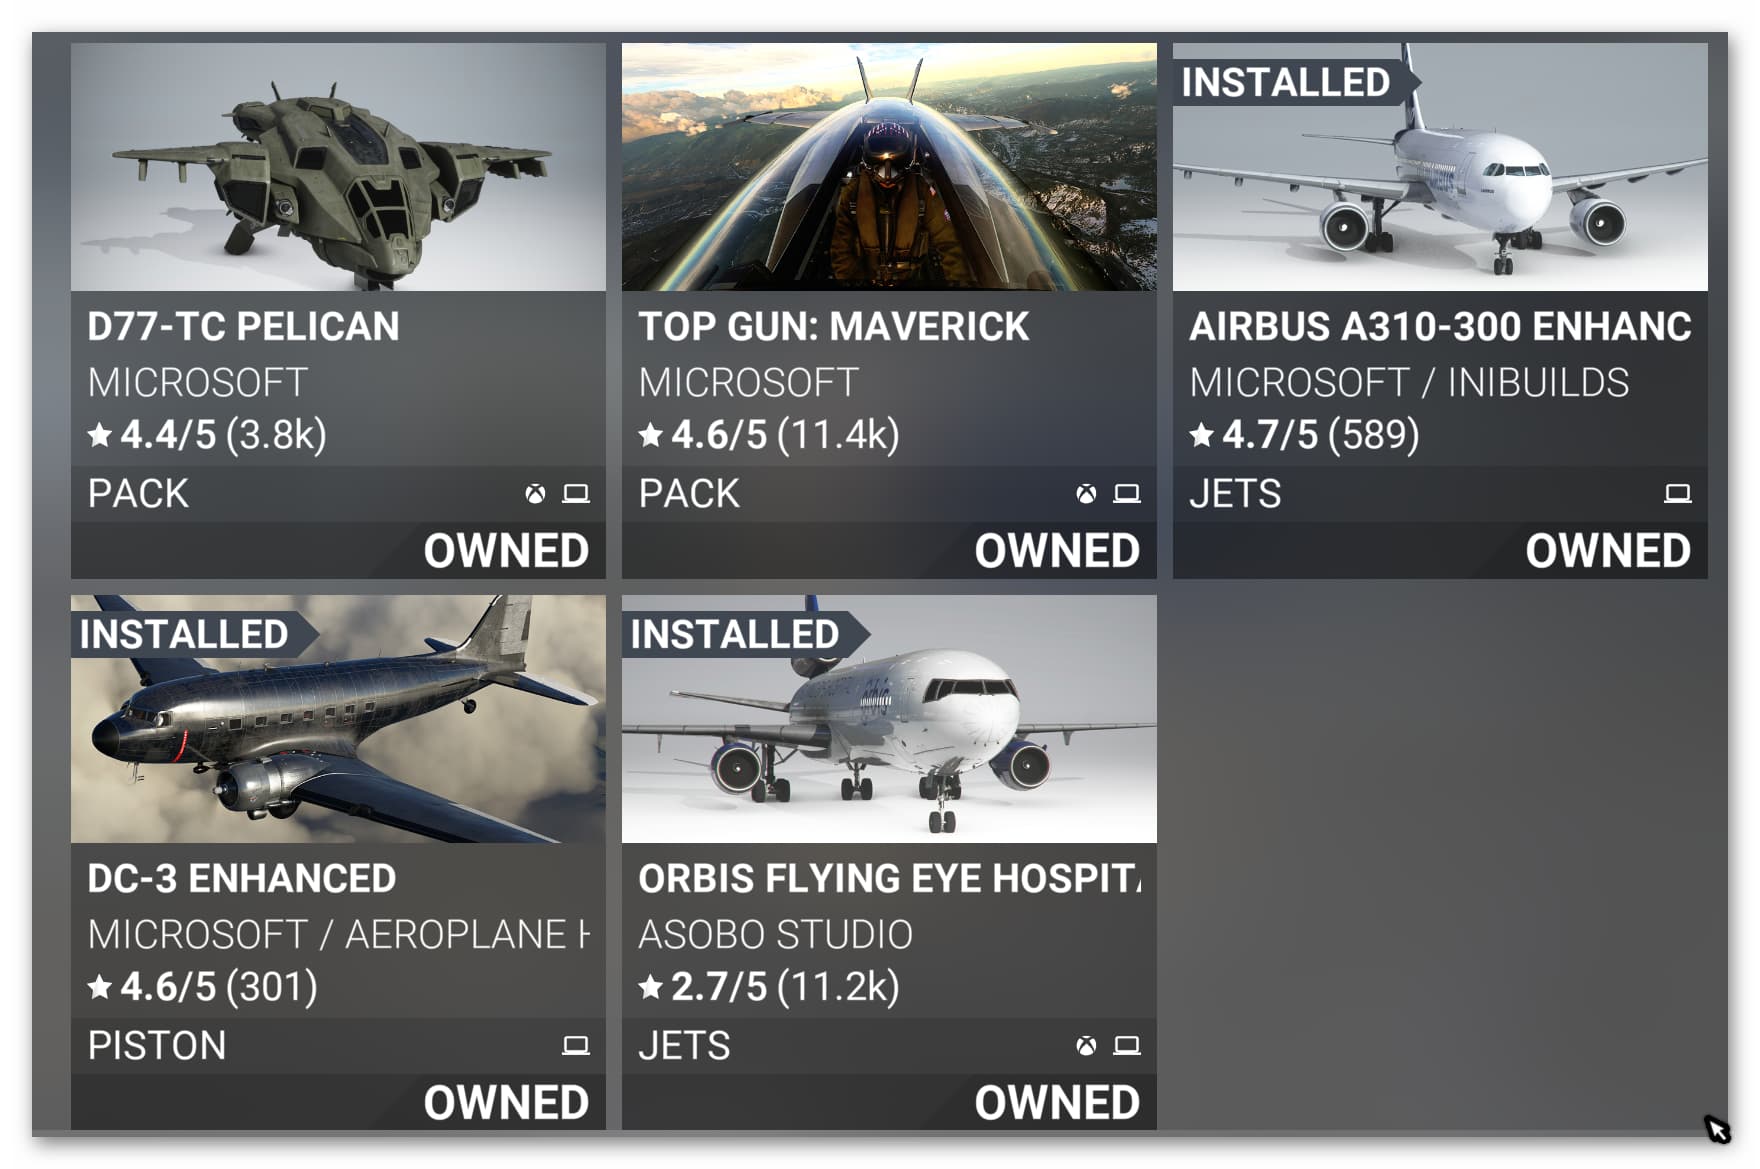 My Marketplace airplanes are gone - Aircraft - Microsoft Flight